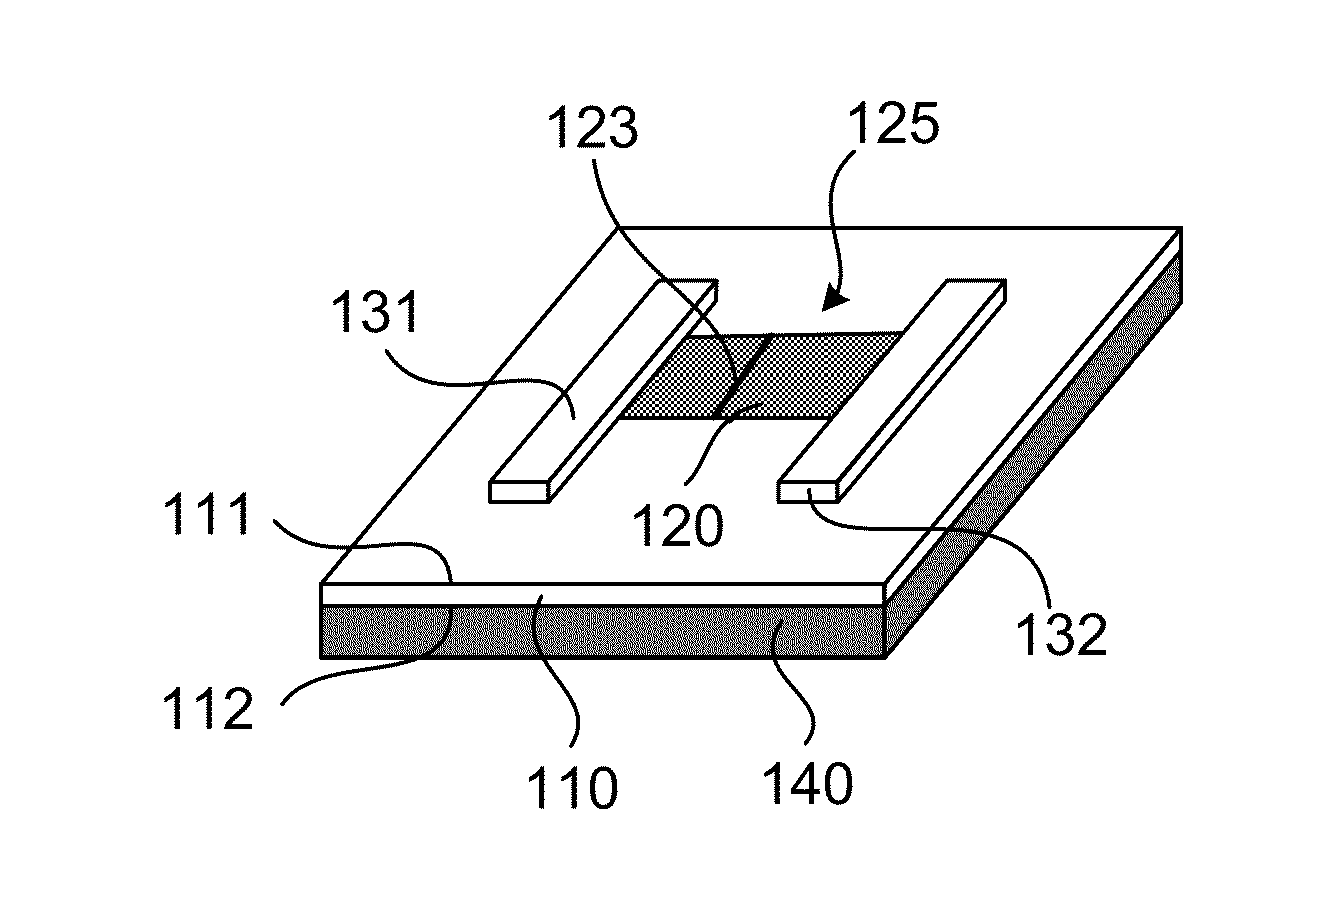 Gate-tunable atomically-thin memristors and methods for preparing same and applications of same